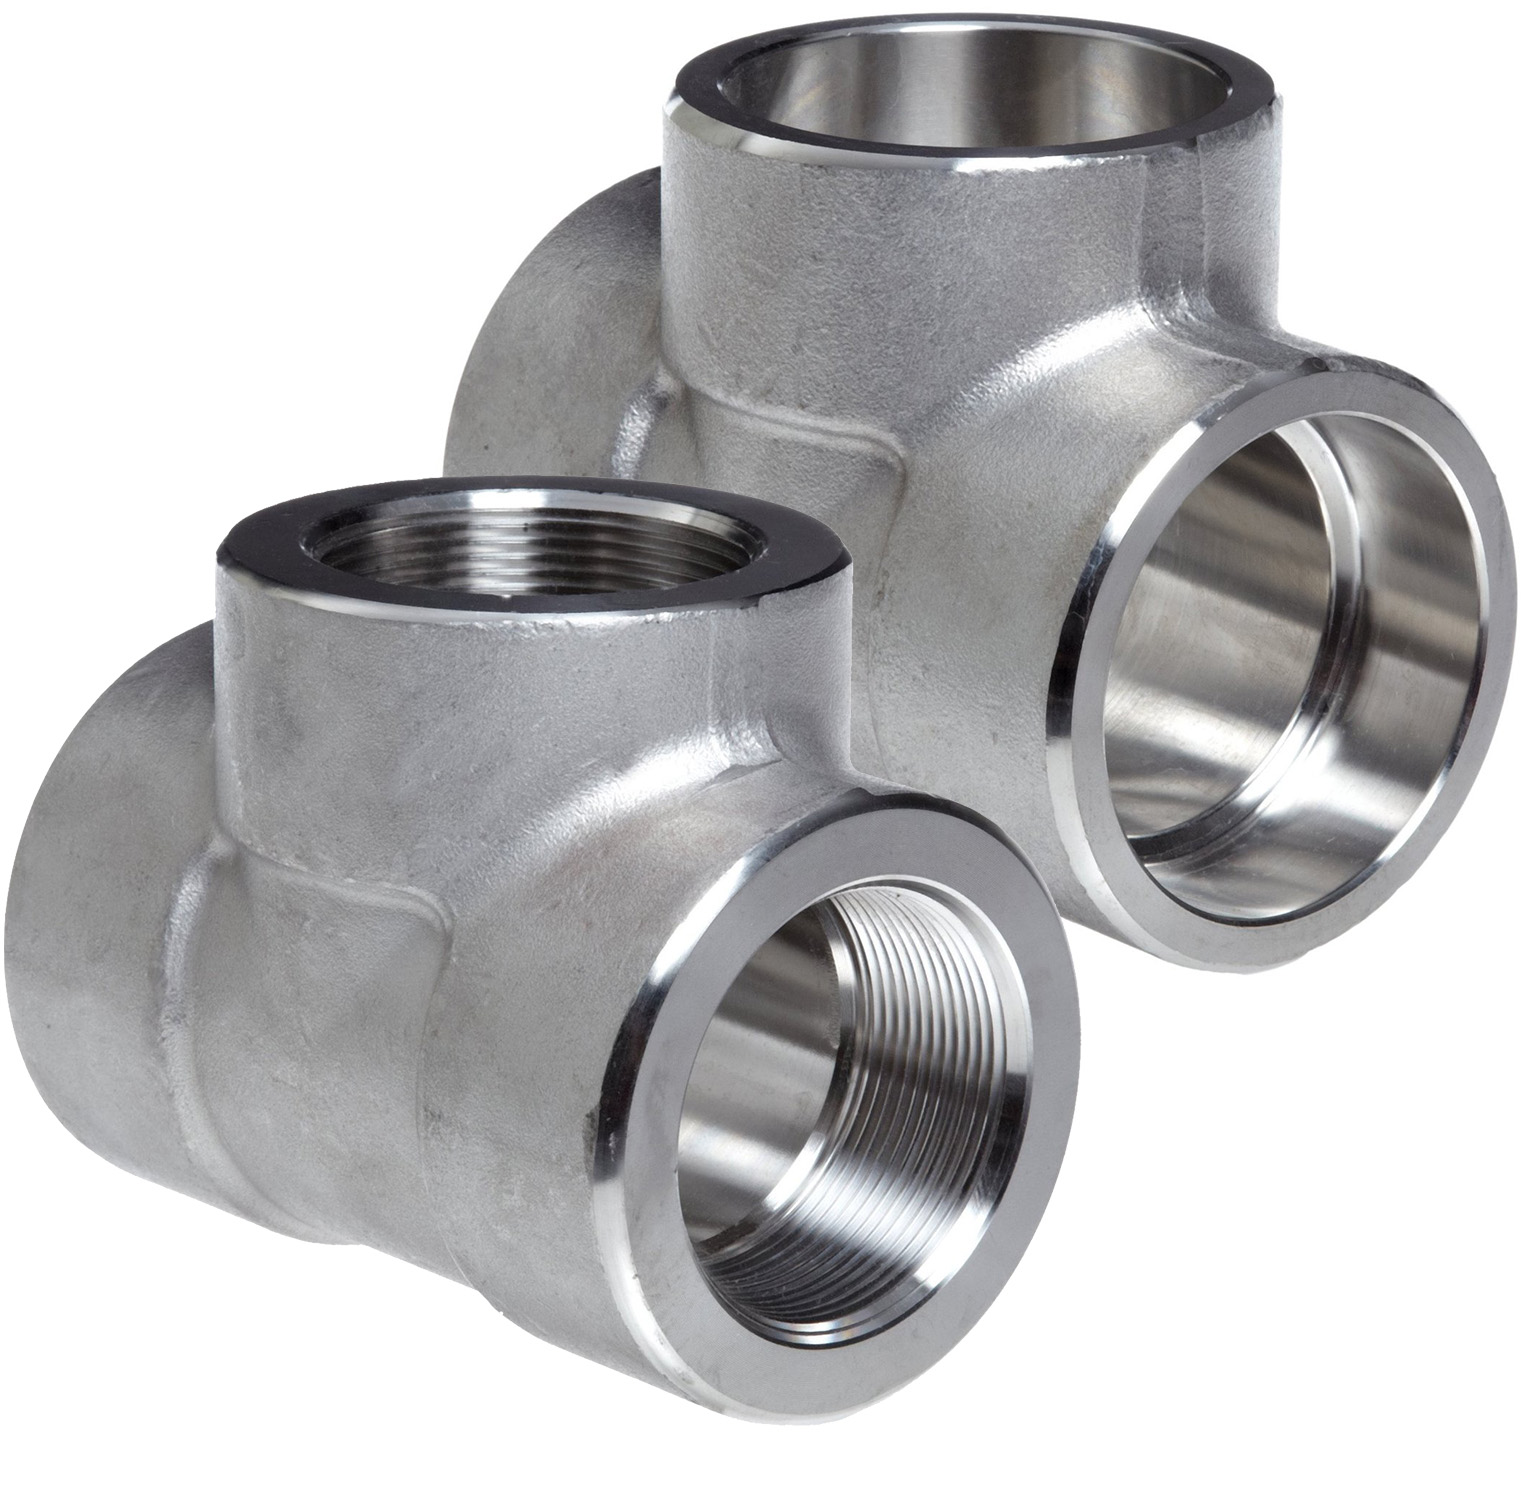 2" X 2" X 1/2" FORGED STEEL PLATED 3000# THREADED TEE 